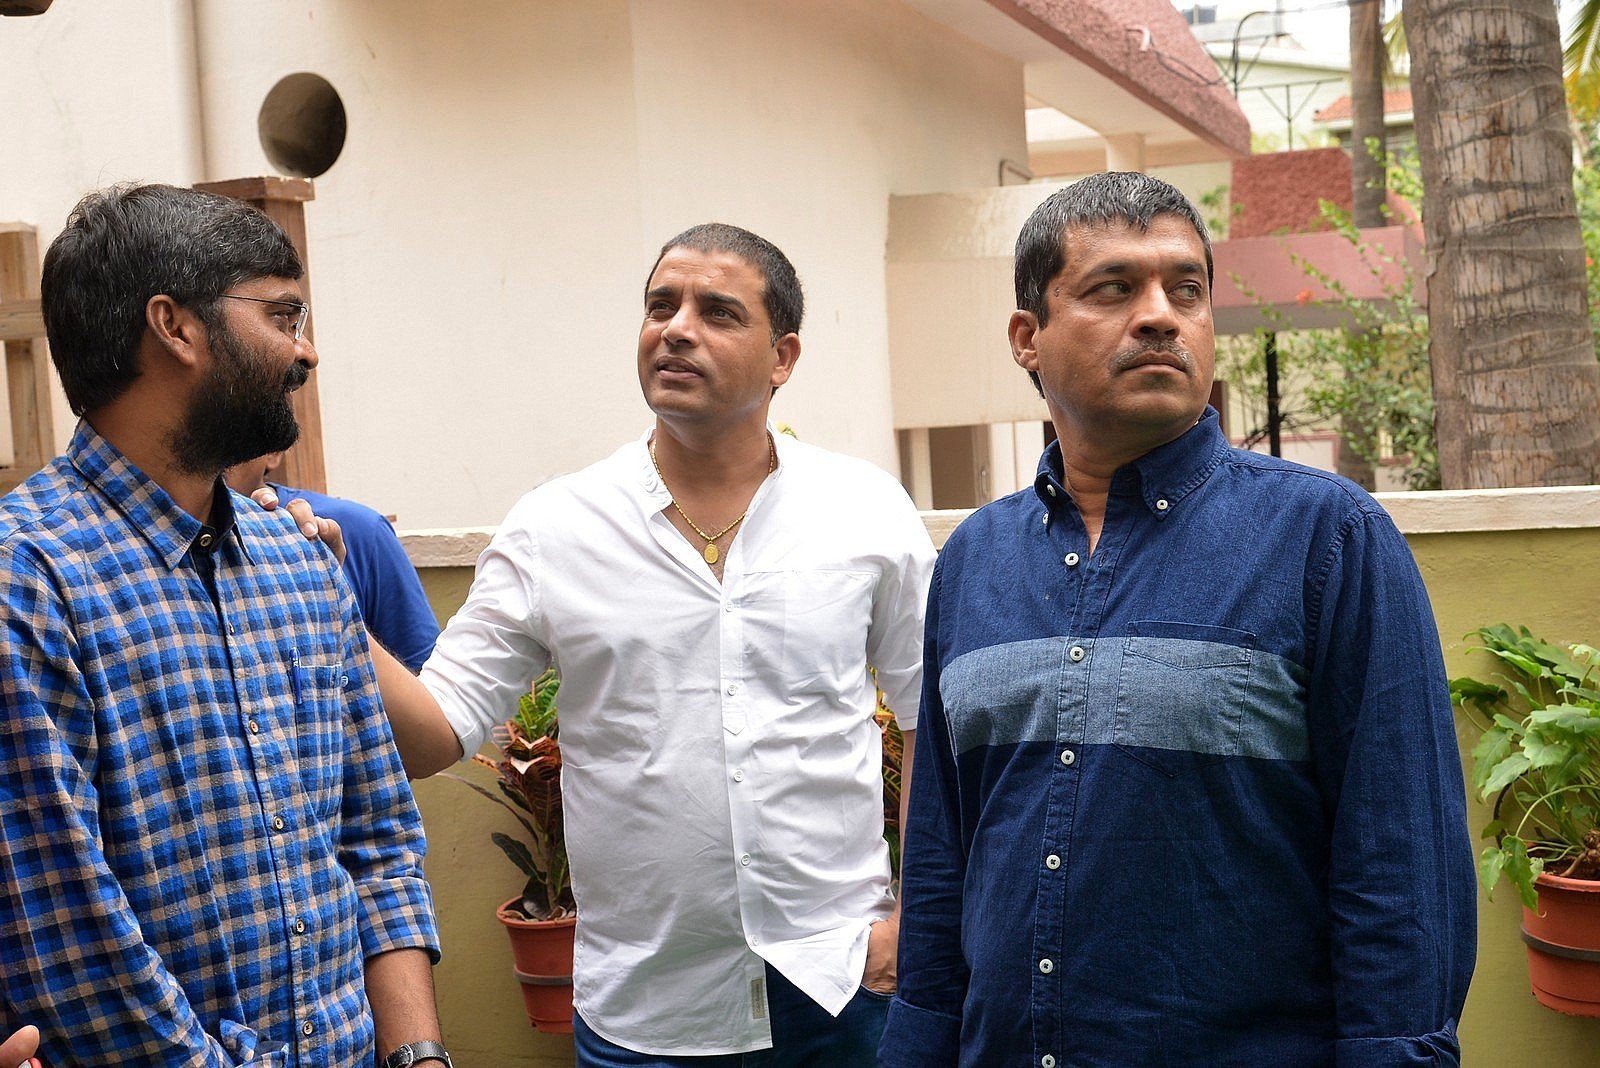 Dil Raju - Nani's MCA Movie Opening Photos | Picture 1496508